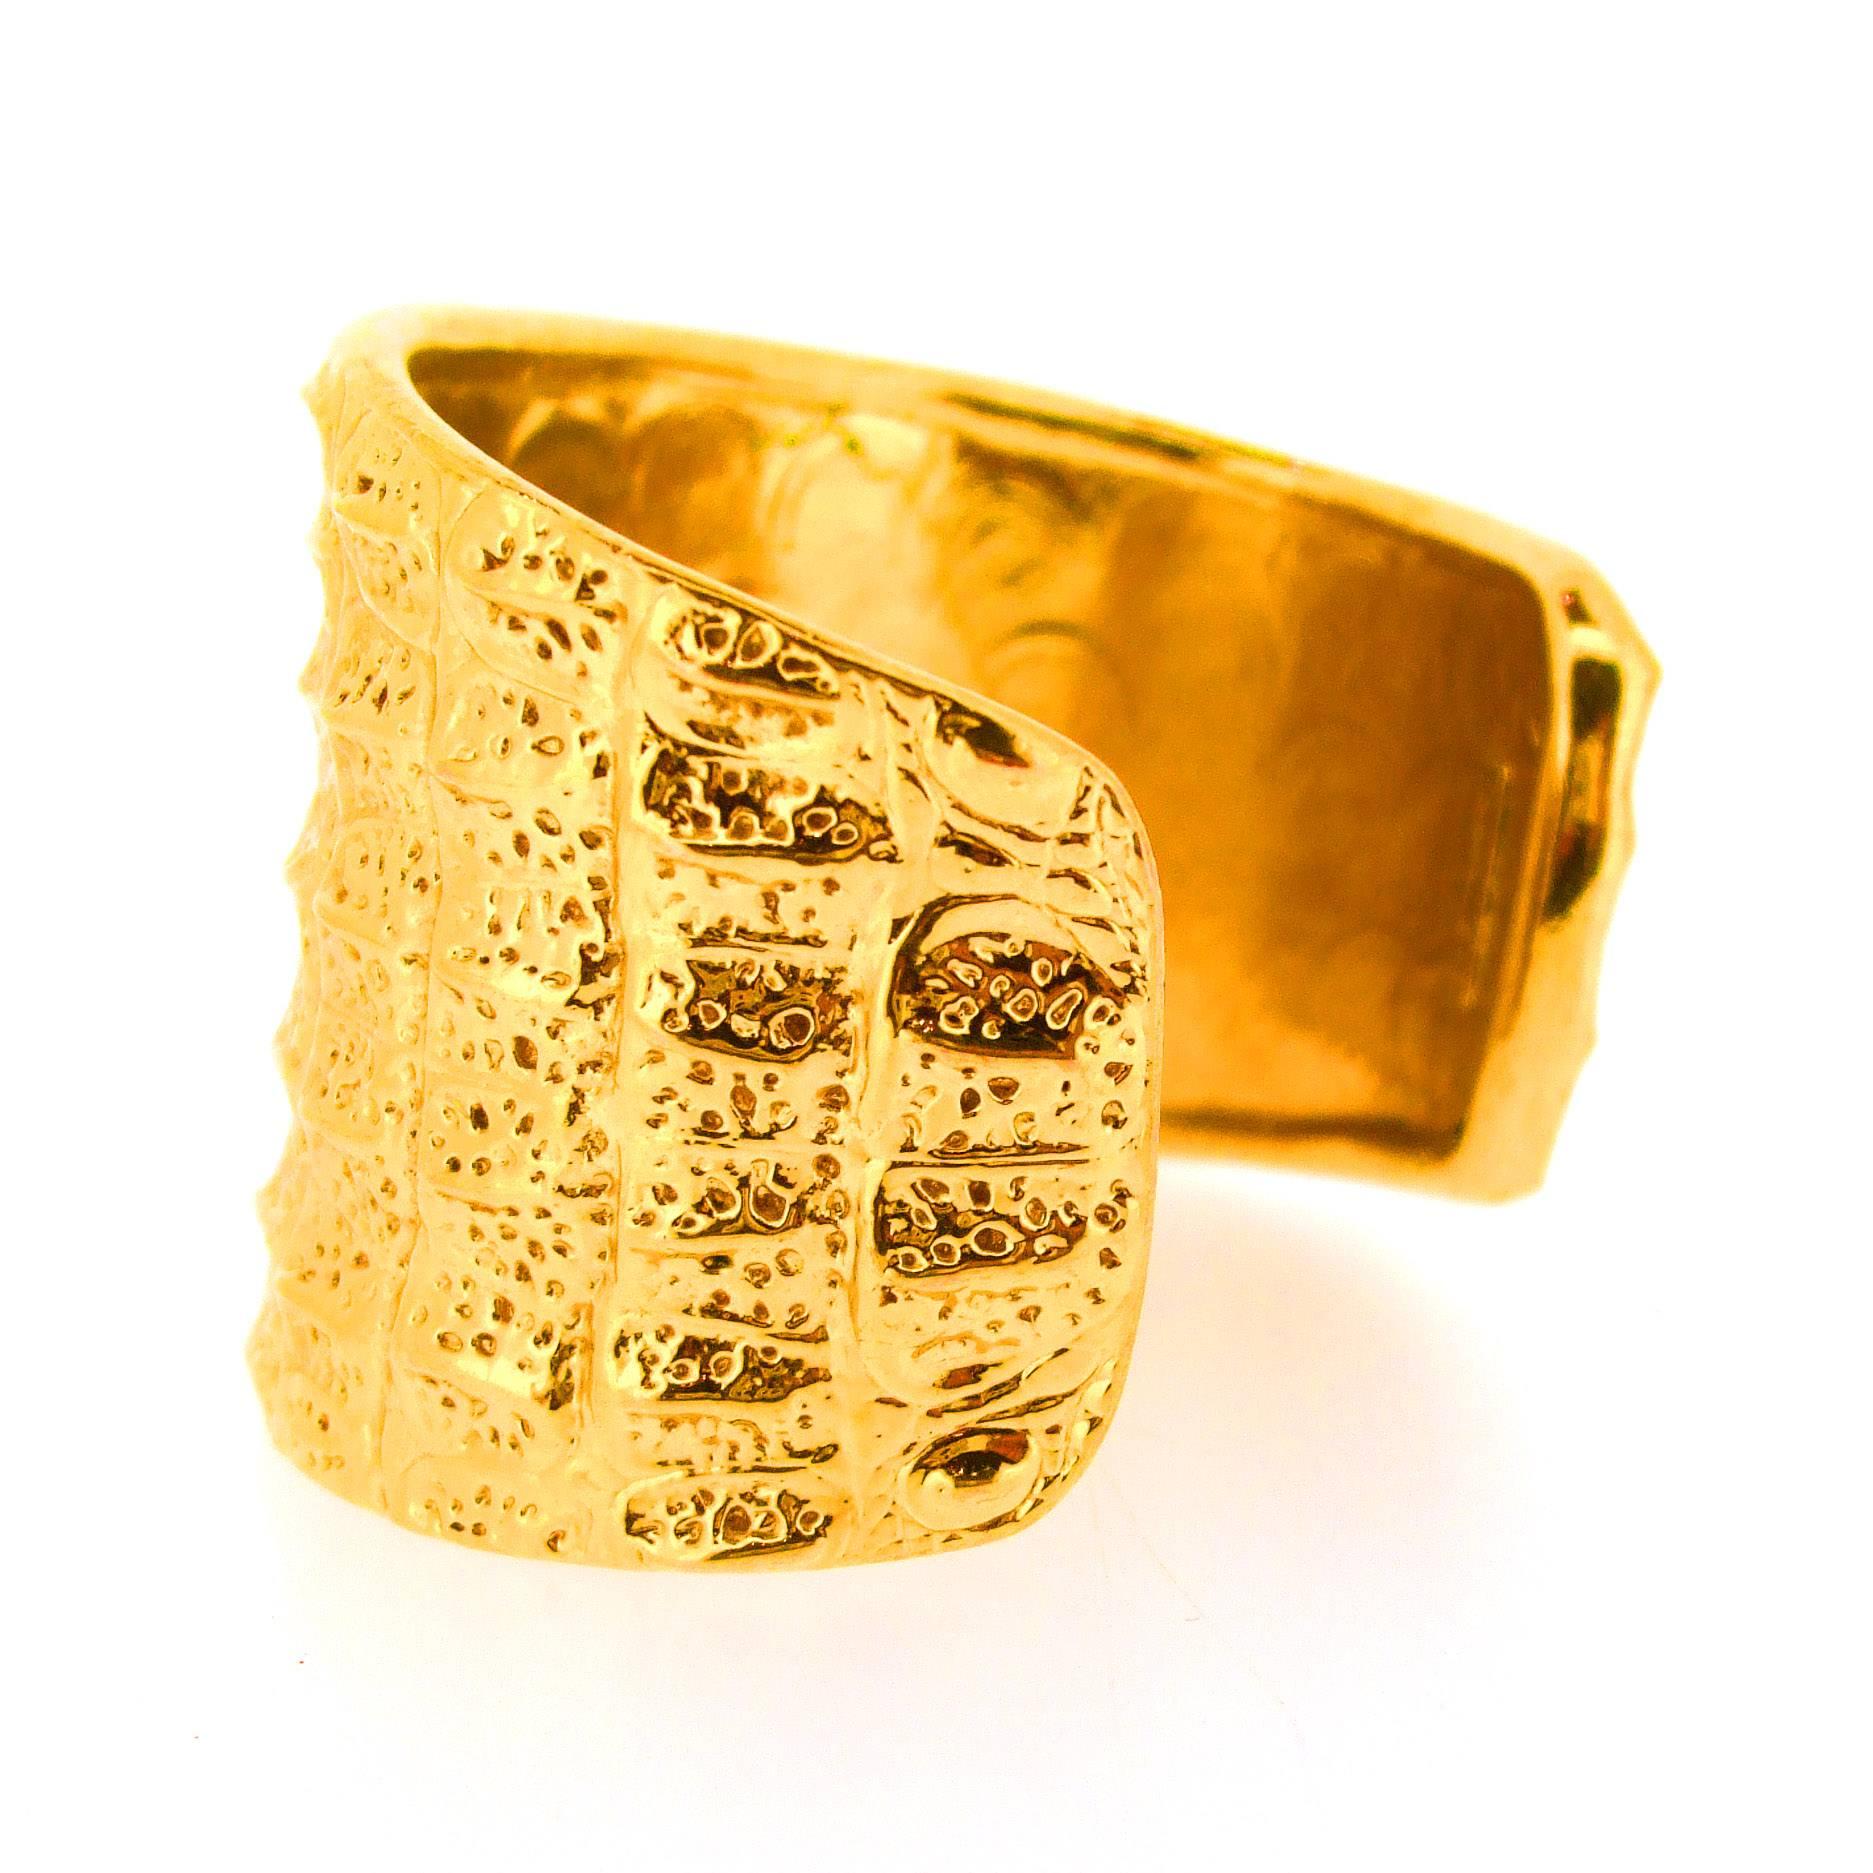 A fabulous cuff bracelet by Yves Saint Laurent. Gold plated costume metal emulating crocodile skin effect 

It measures 6.5cm across, 4.6cm high/ deep, 7 inches/ 17.5cm around the wrist. 